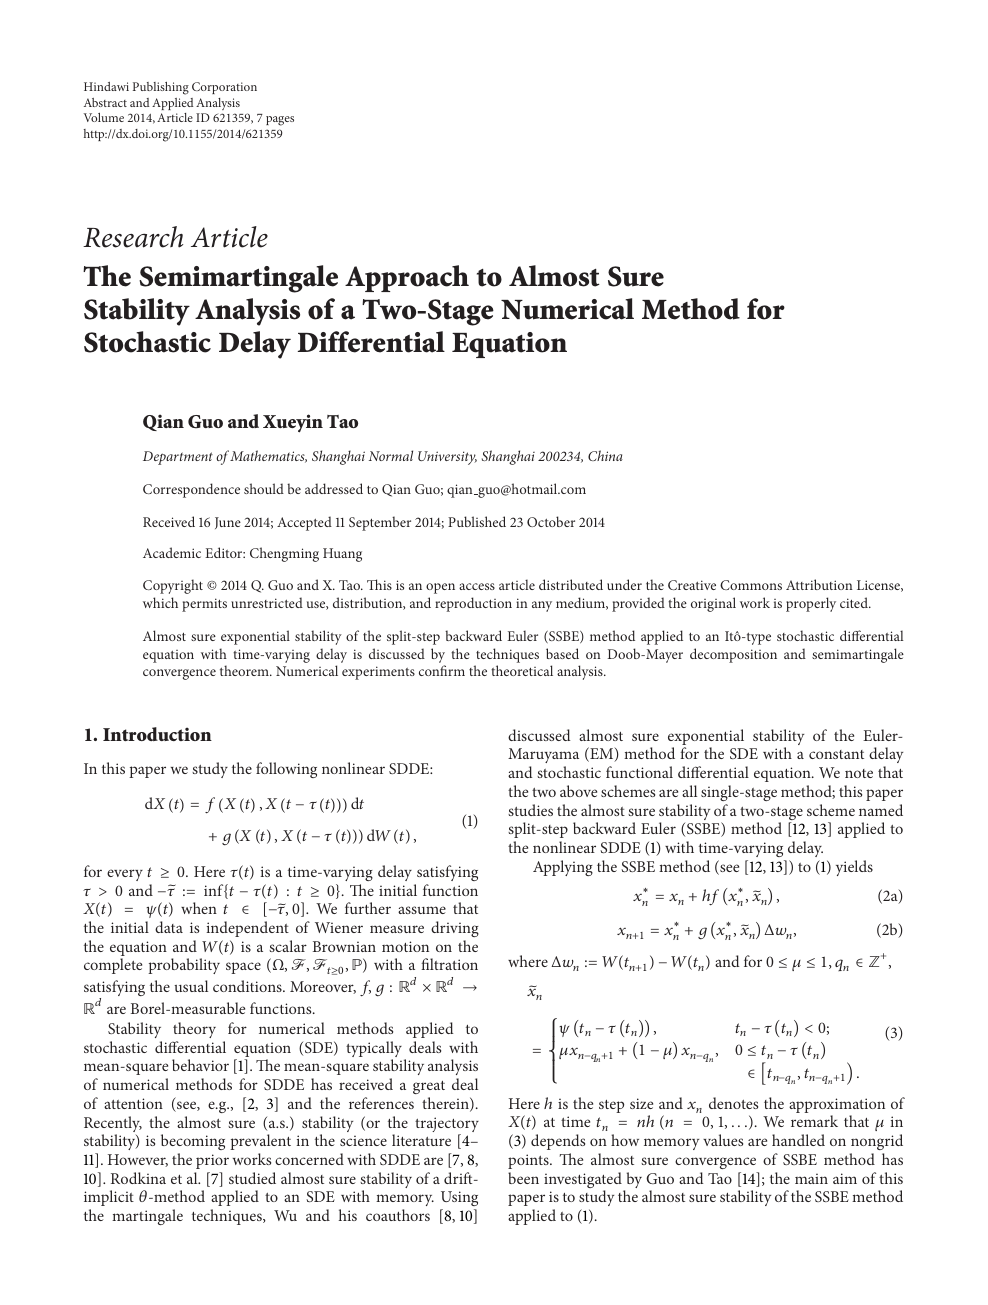 The Semimartingale Approach To Almost Sure Stability Analysis Of A Two Stage Numerical Method For Stochastic Delay Differential Equation Topic Of Research Paper In Mathematics Download Scholarly Article Pdf And Read For